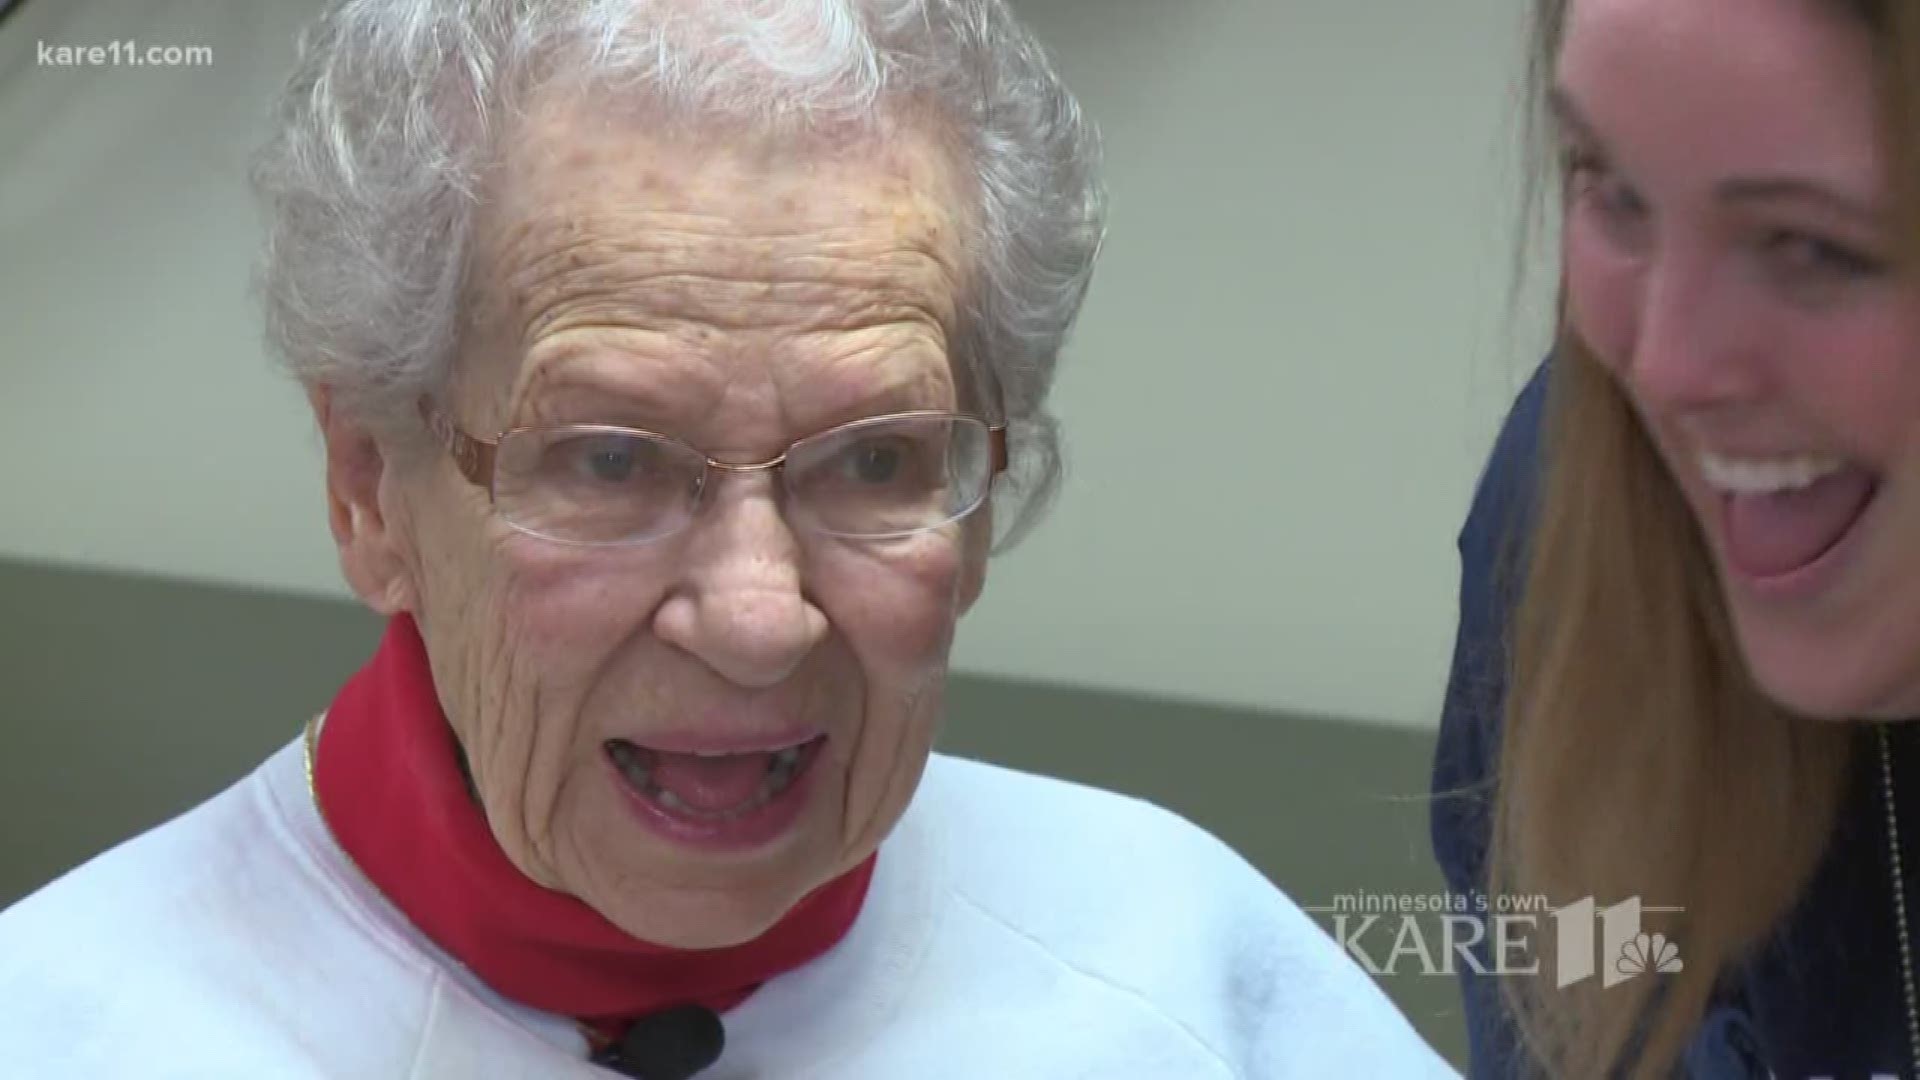 Minnesota Twins gave a special treat to a 95-year-old fan to help celebrate her birthday.